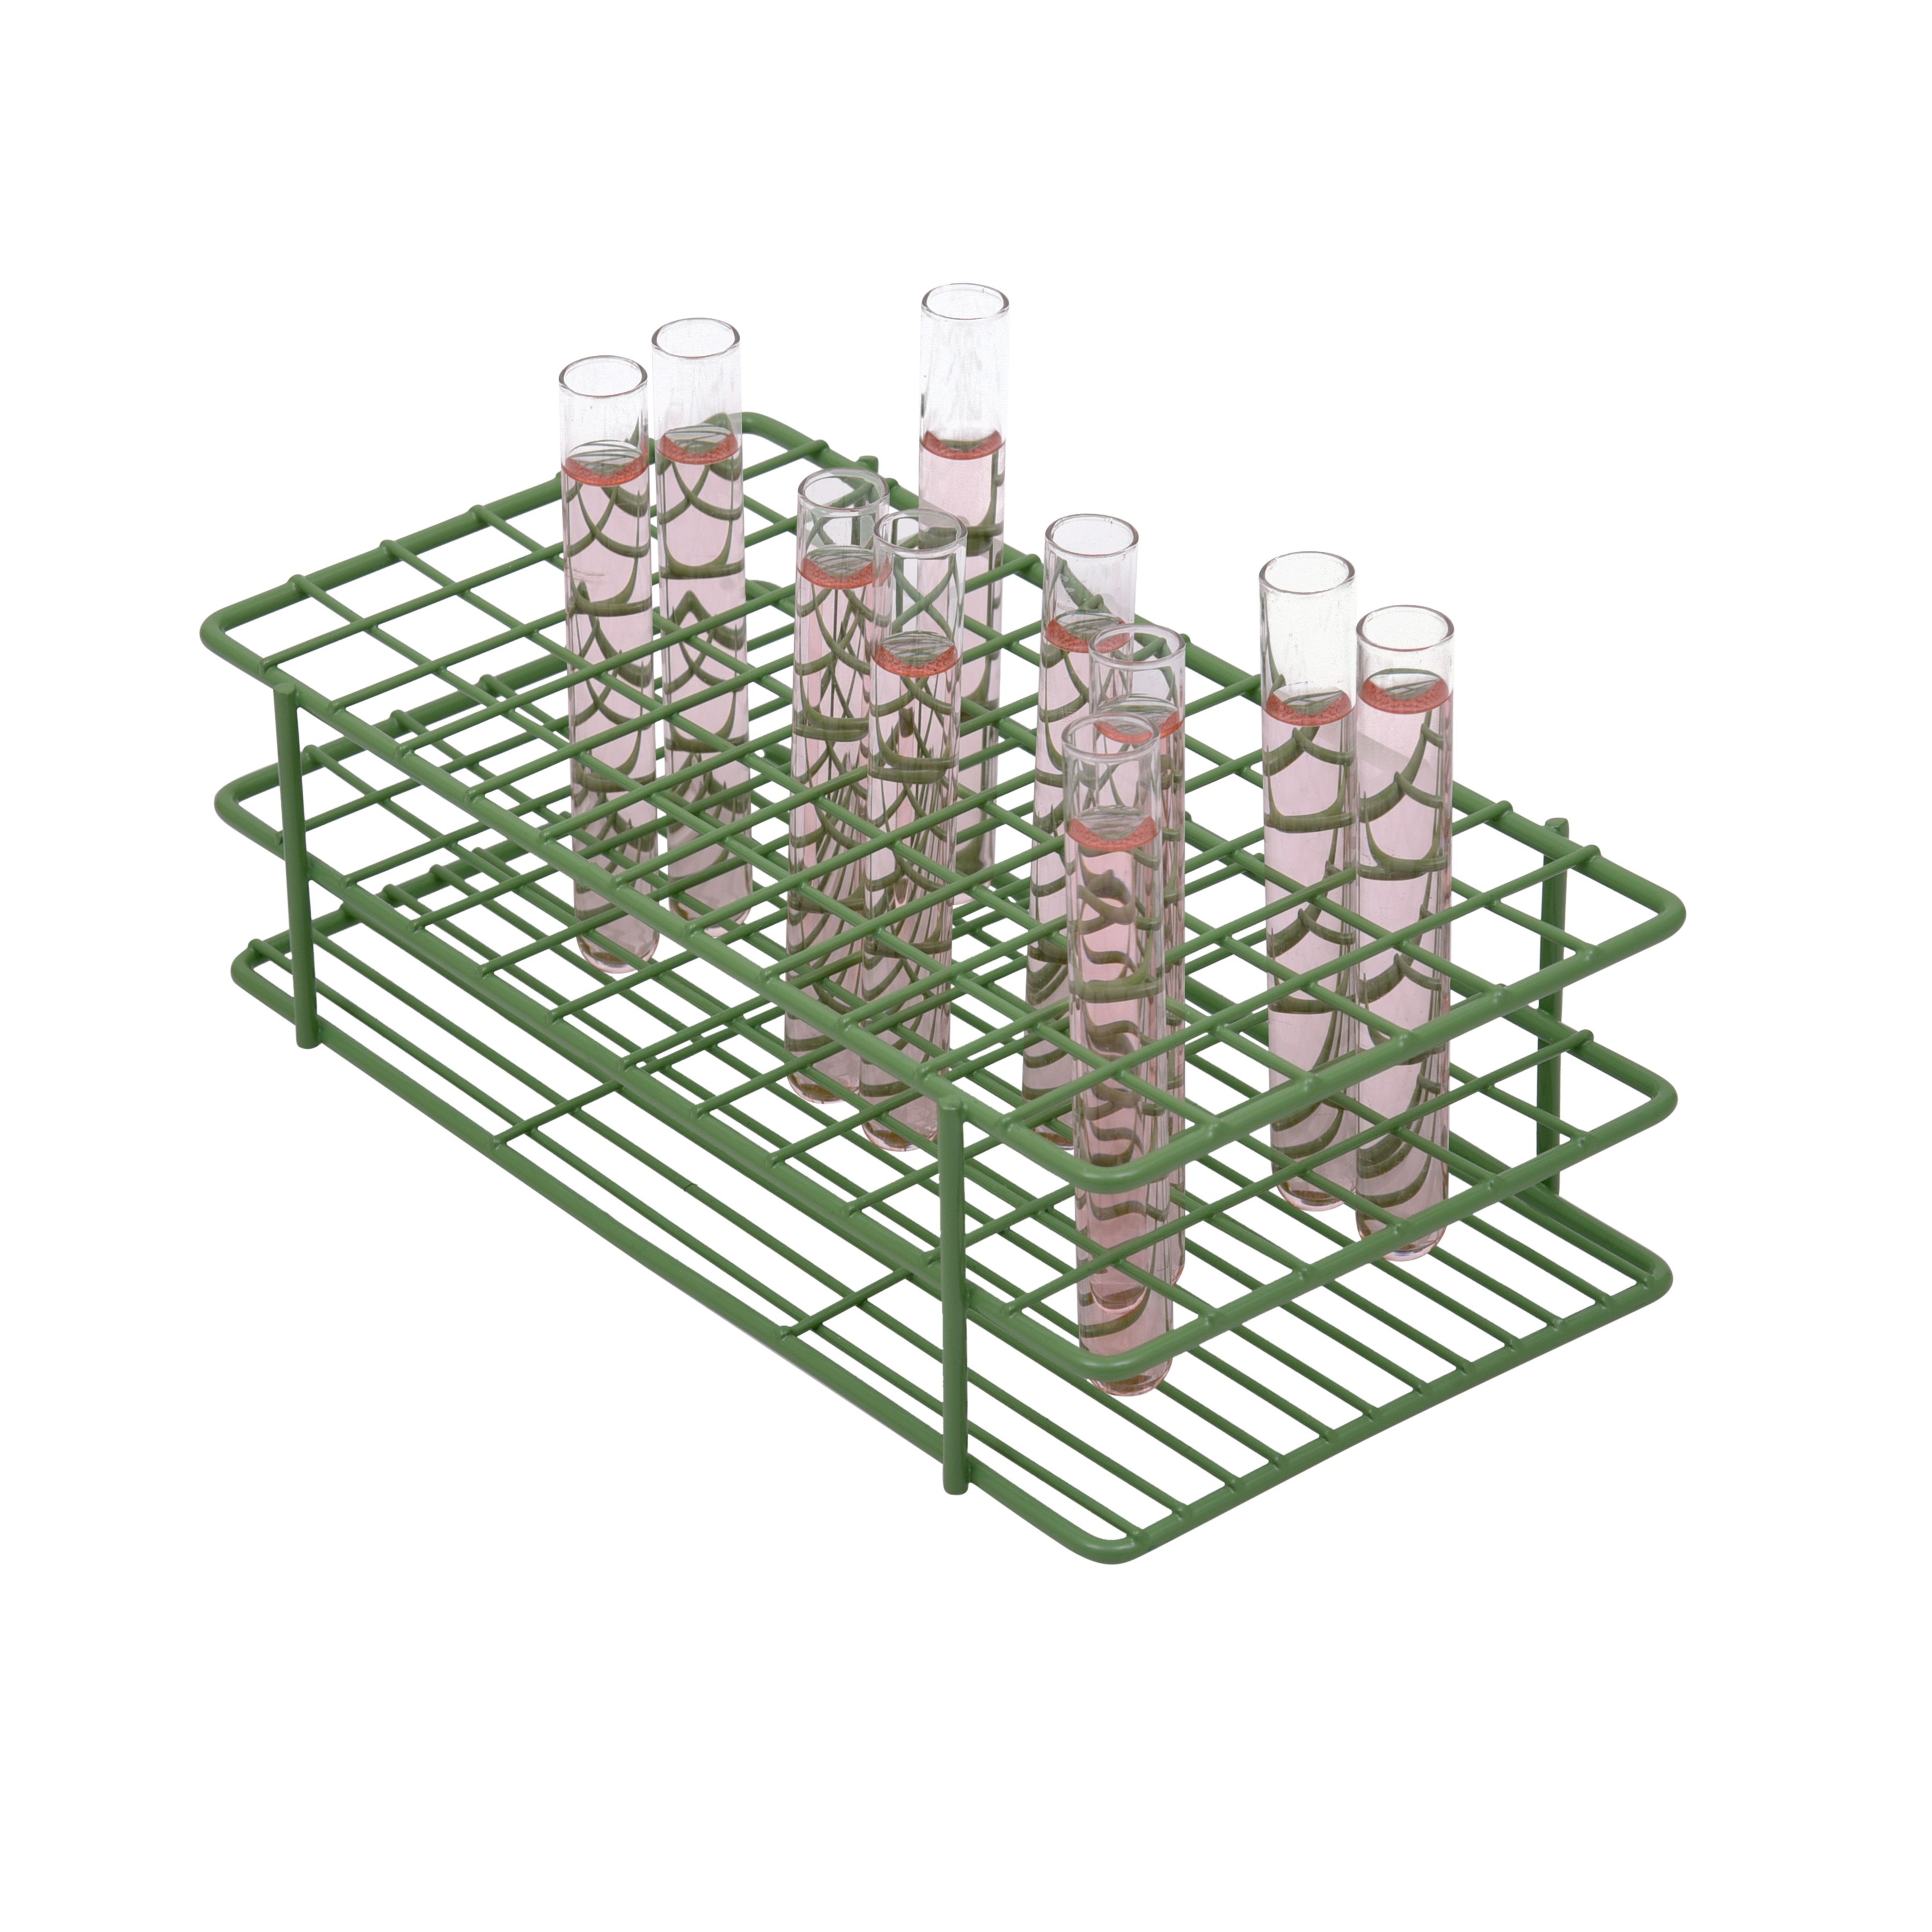 Blue Bel-Art F18757-0001 Poxygrid Test Tube Rack; 13-16mm 9¹/₂ x 5¹/₈ x 2¹/₂ in. 72 Places 